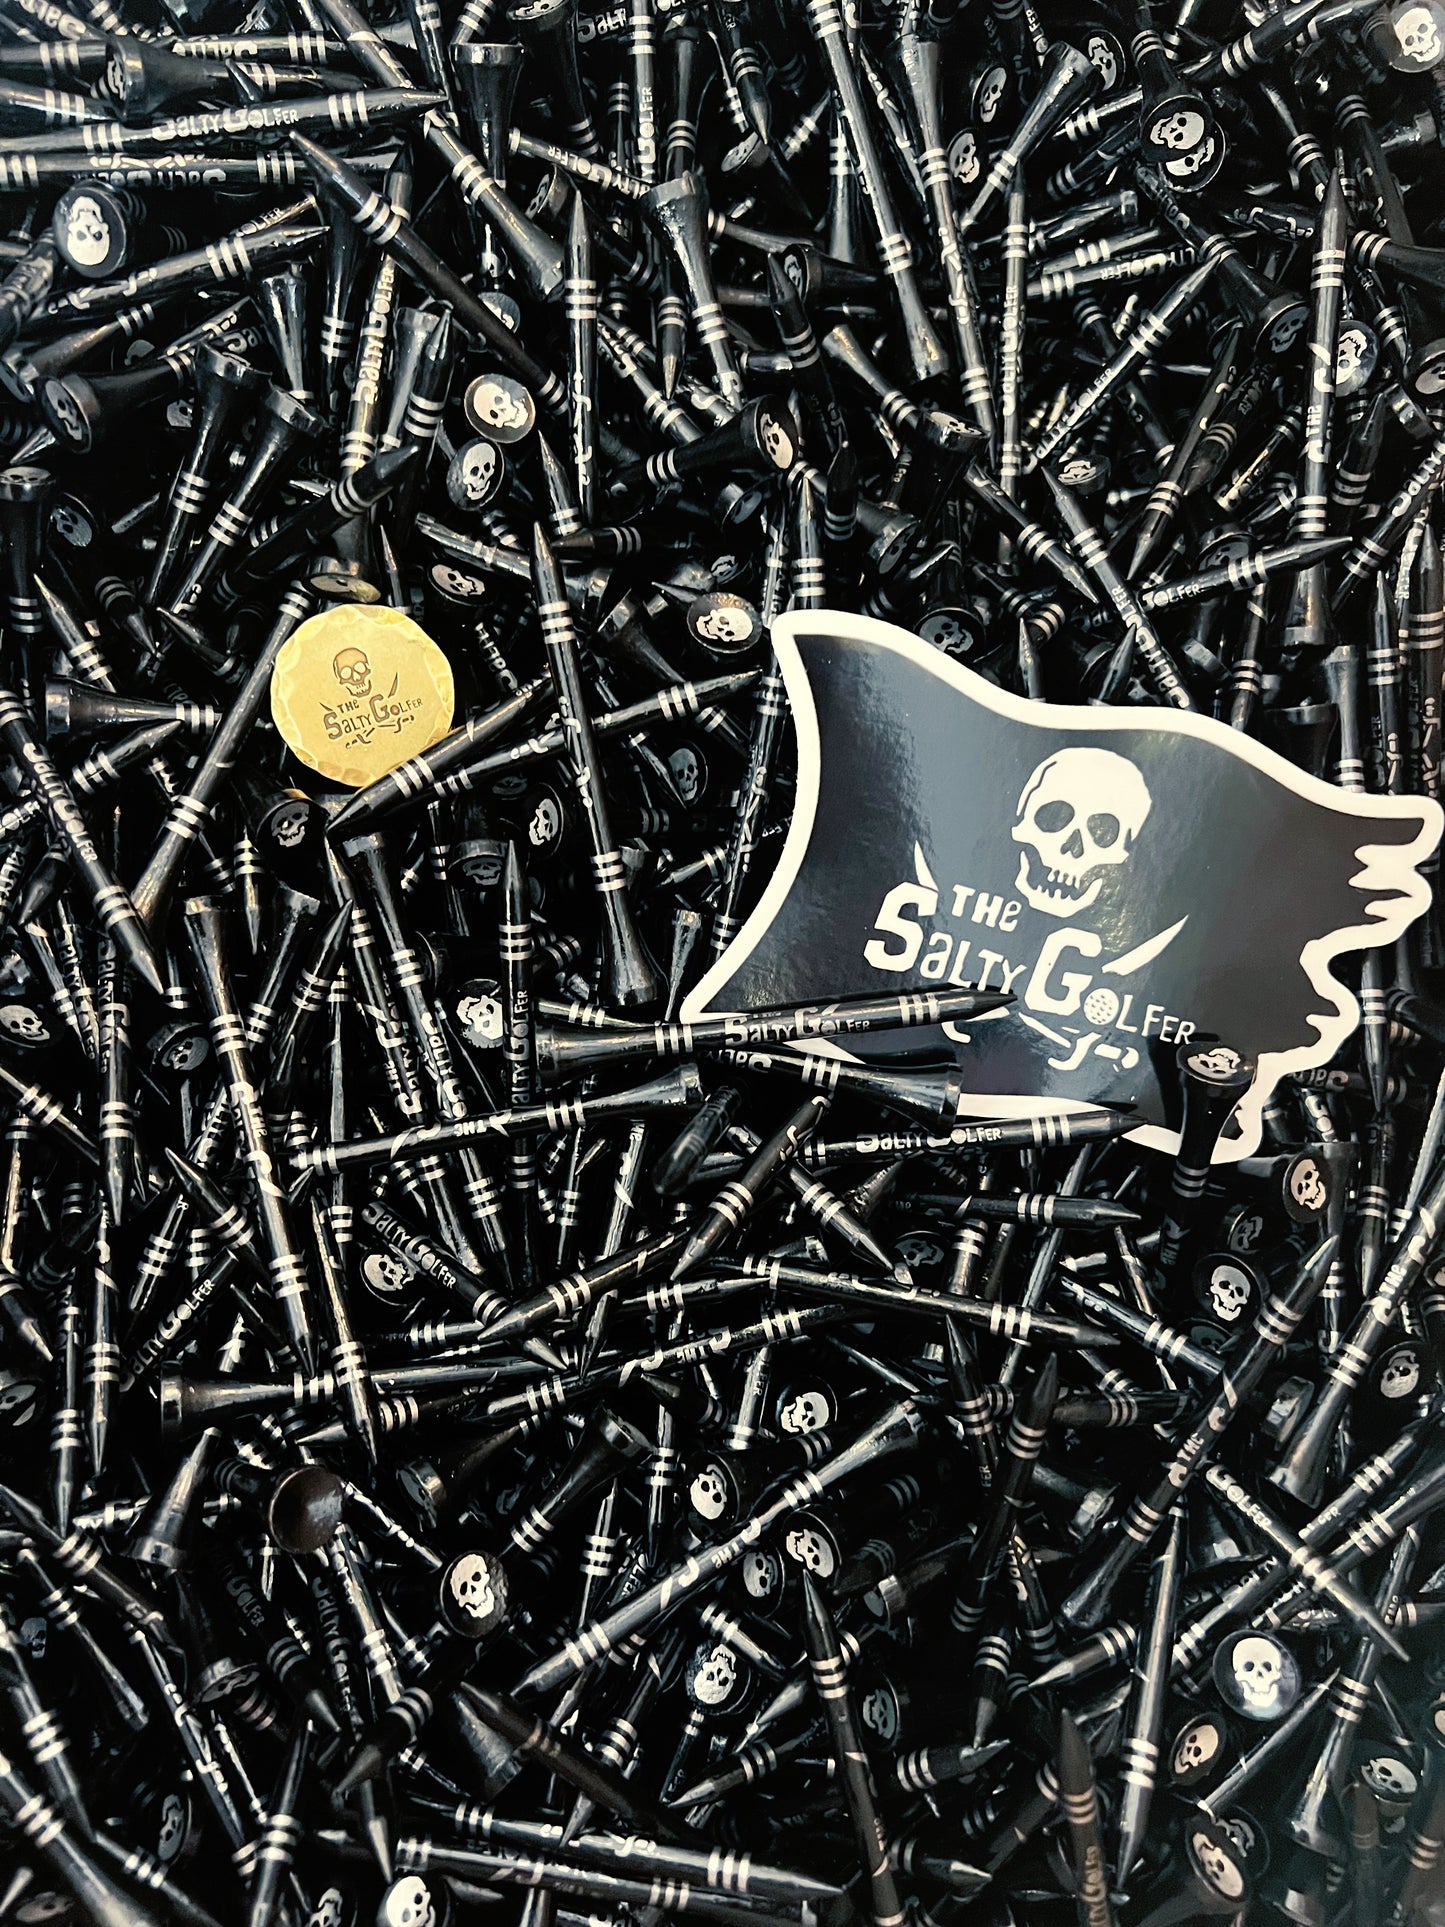 Salty’s gold ballmarker and tee pack